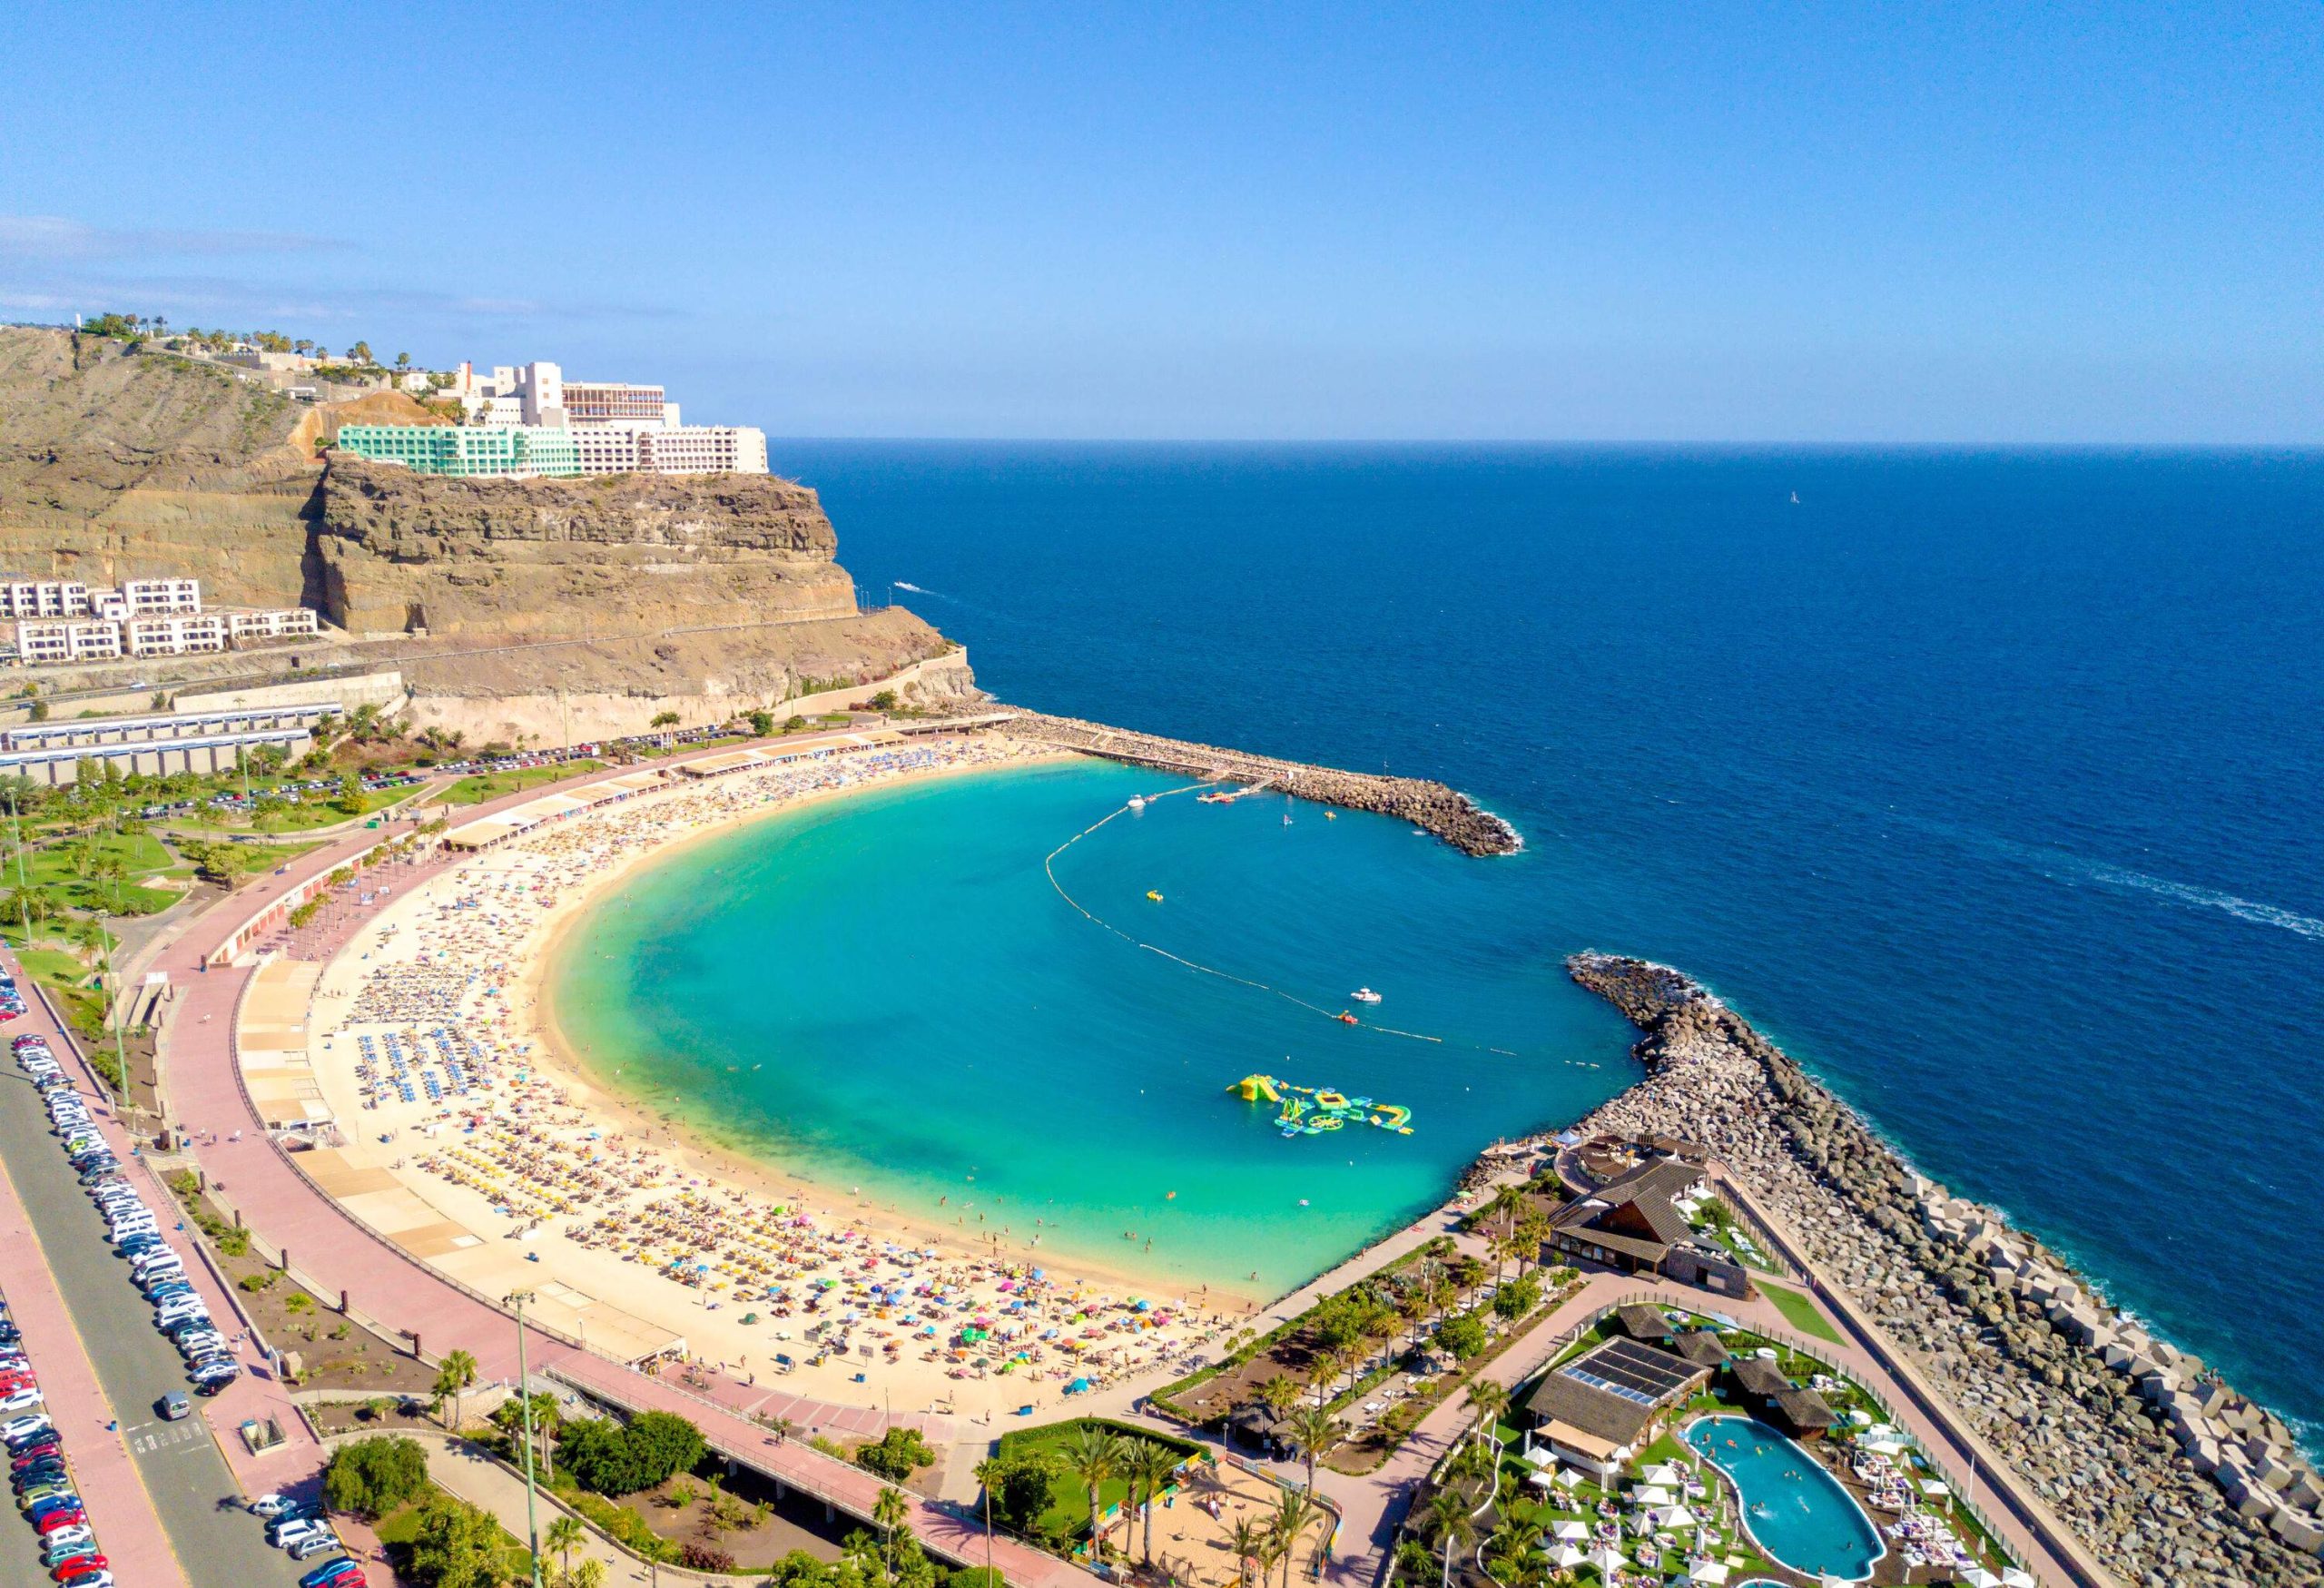 Aerial view of a crowded beach shore and the blue water beach flanked with luxury resorts and a modern building on the cliff.